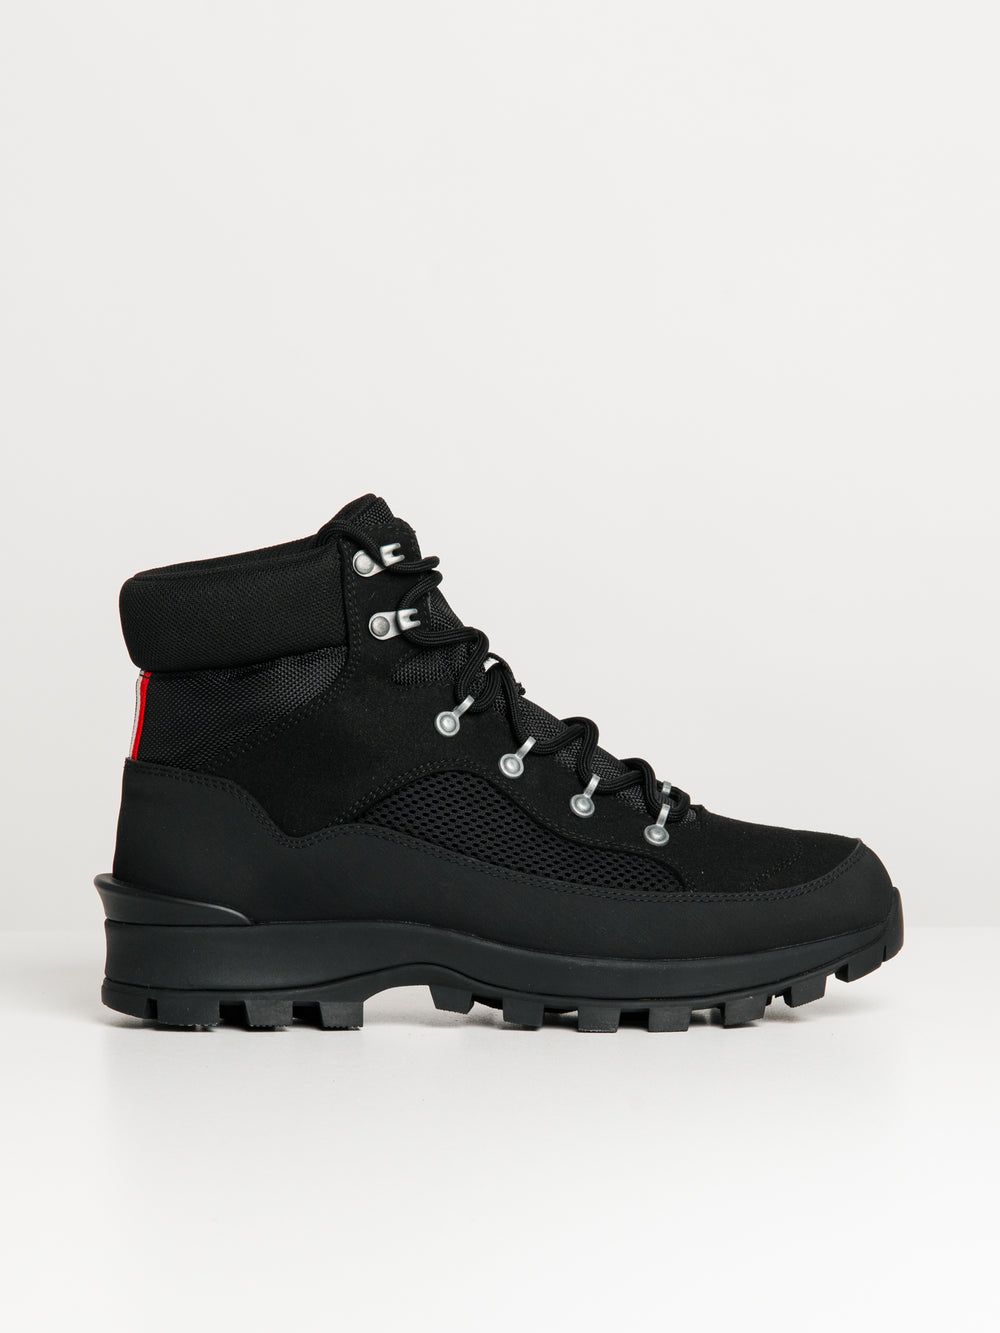 MENS HUNTER EXPLORER MID LACE BOOT - CLEARANCE